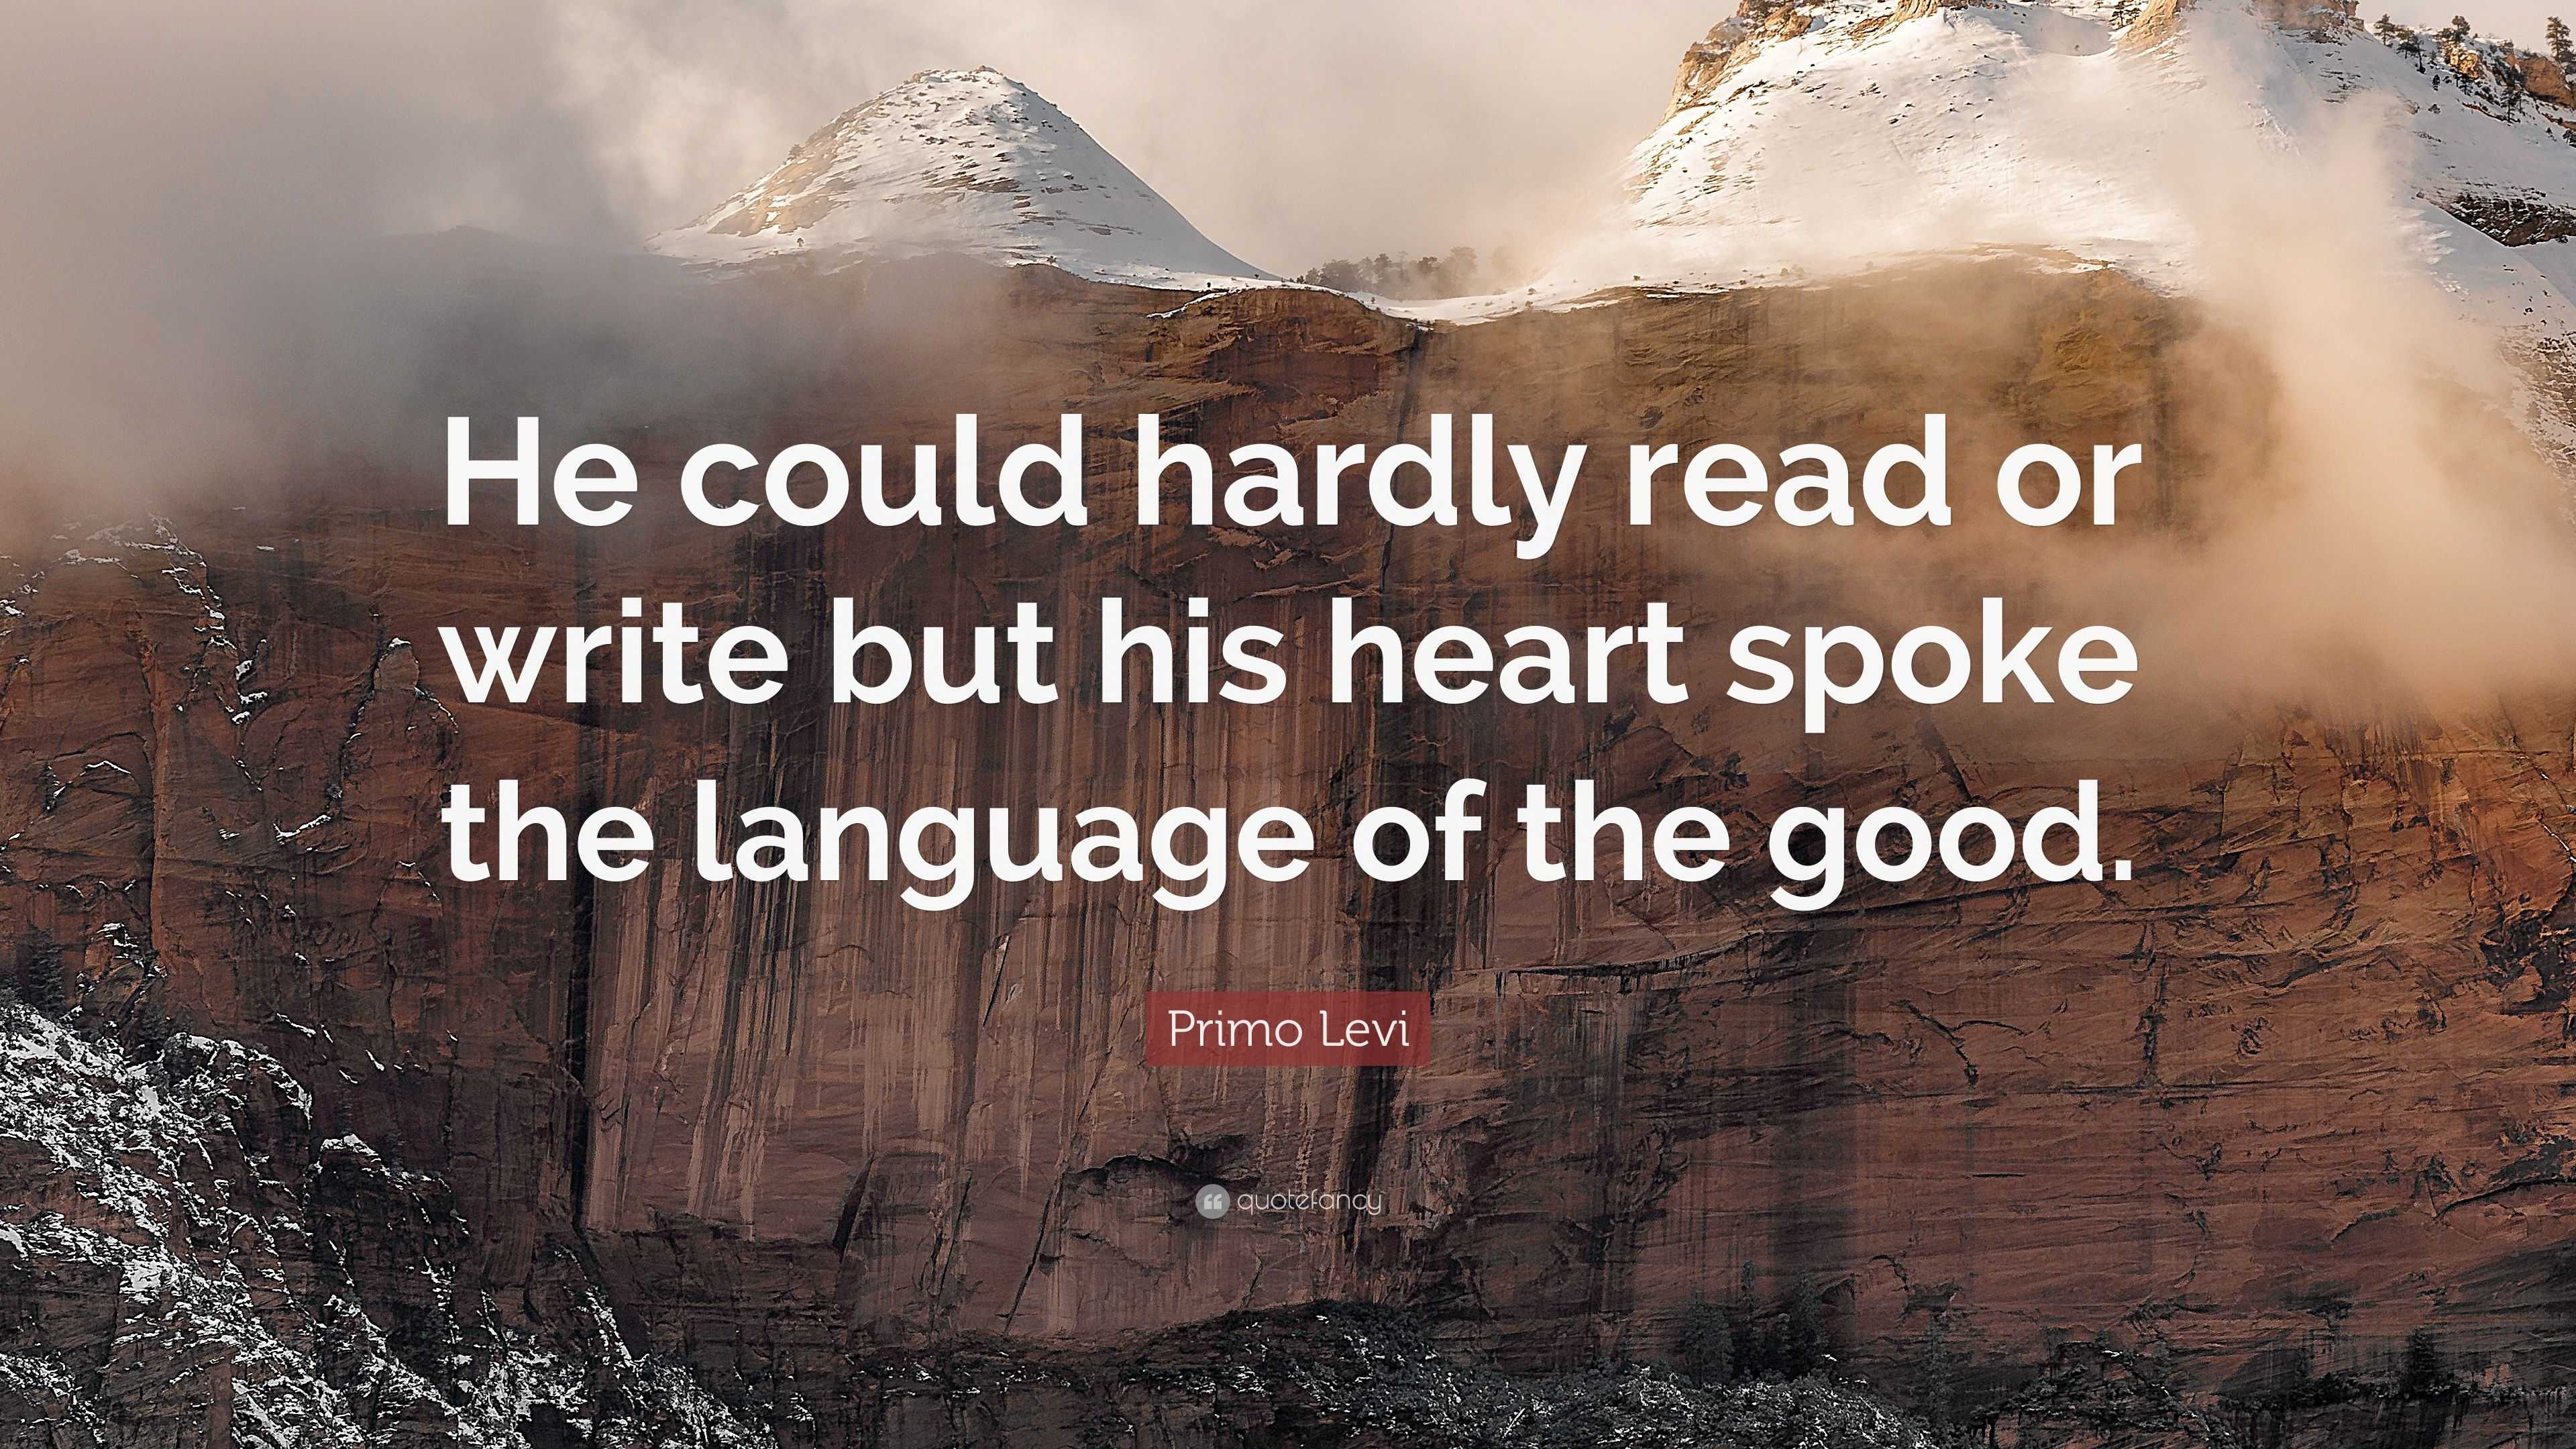 Primo Levi Quote: “He could hardly read or write but his heart spoke ...